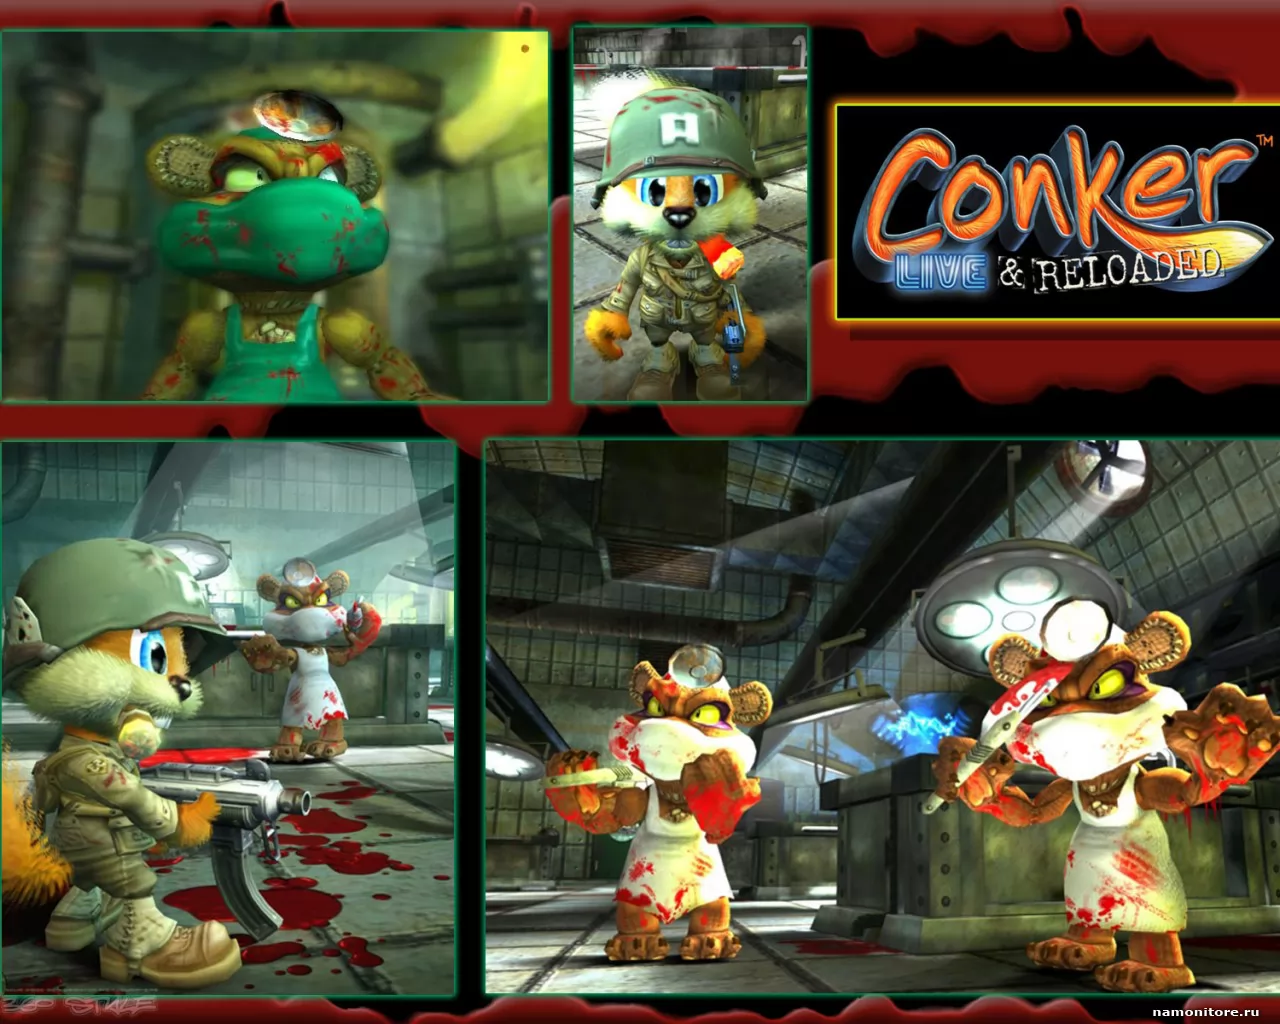 Conker: Live & Reloded,   